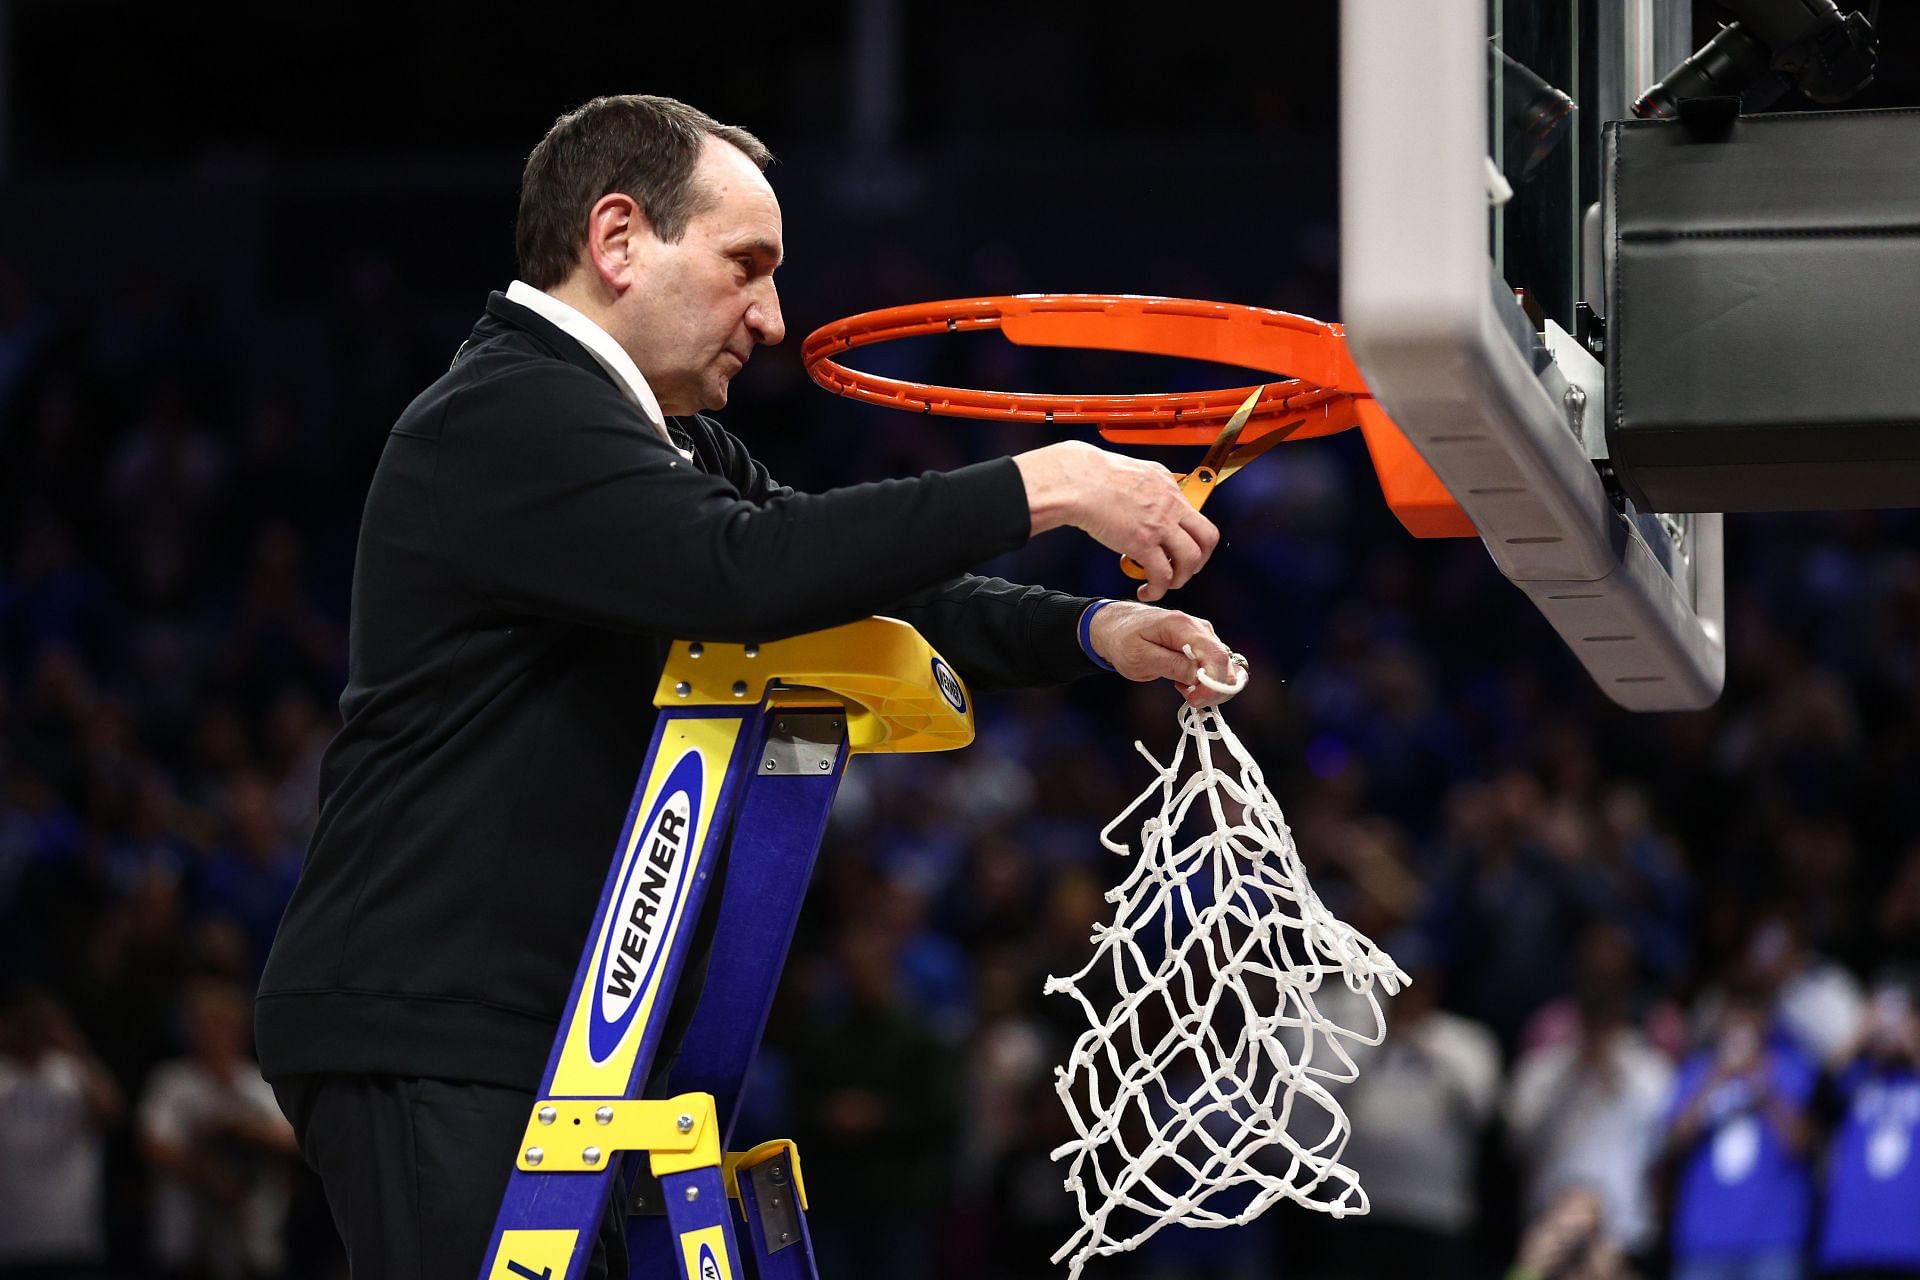 Jon Rothstein believes Coach K will achieve a fairytale ending and cut down the final NCAA nets.